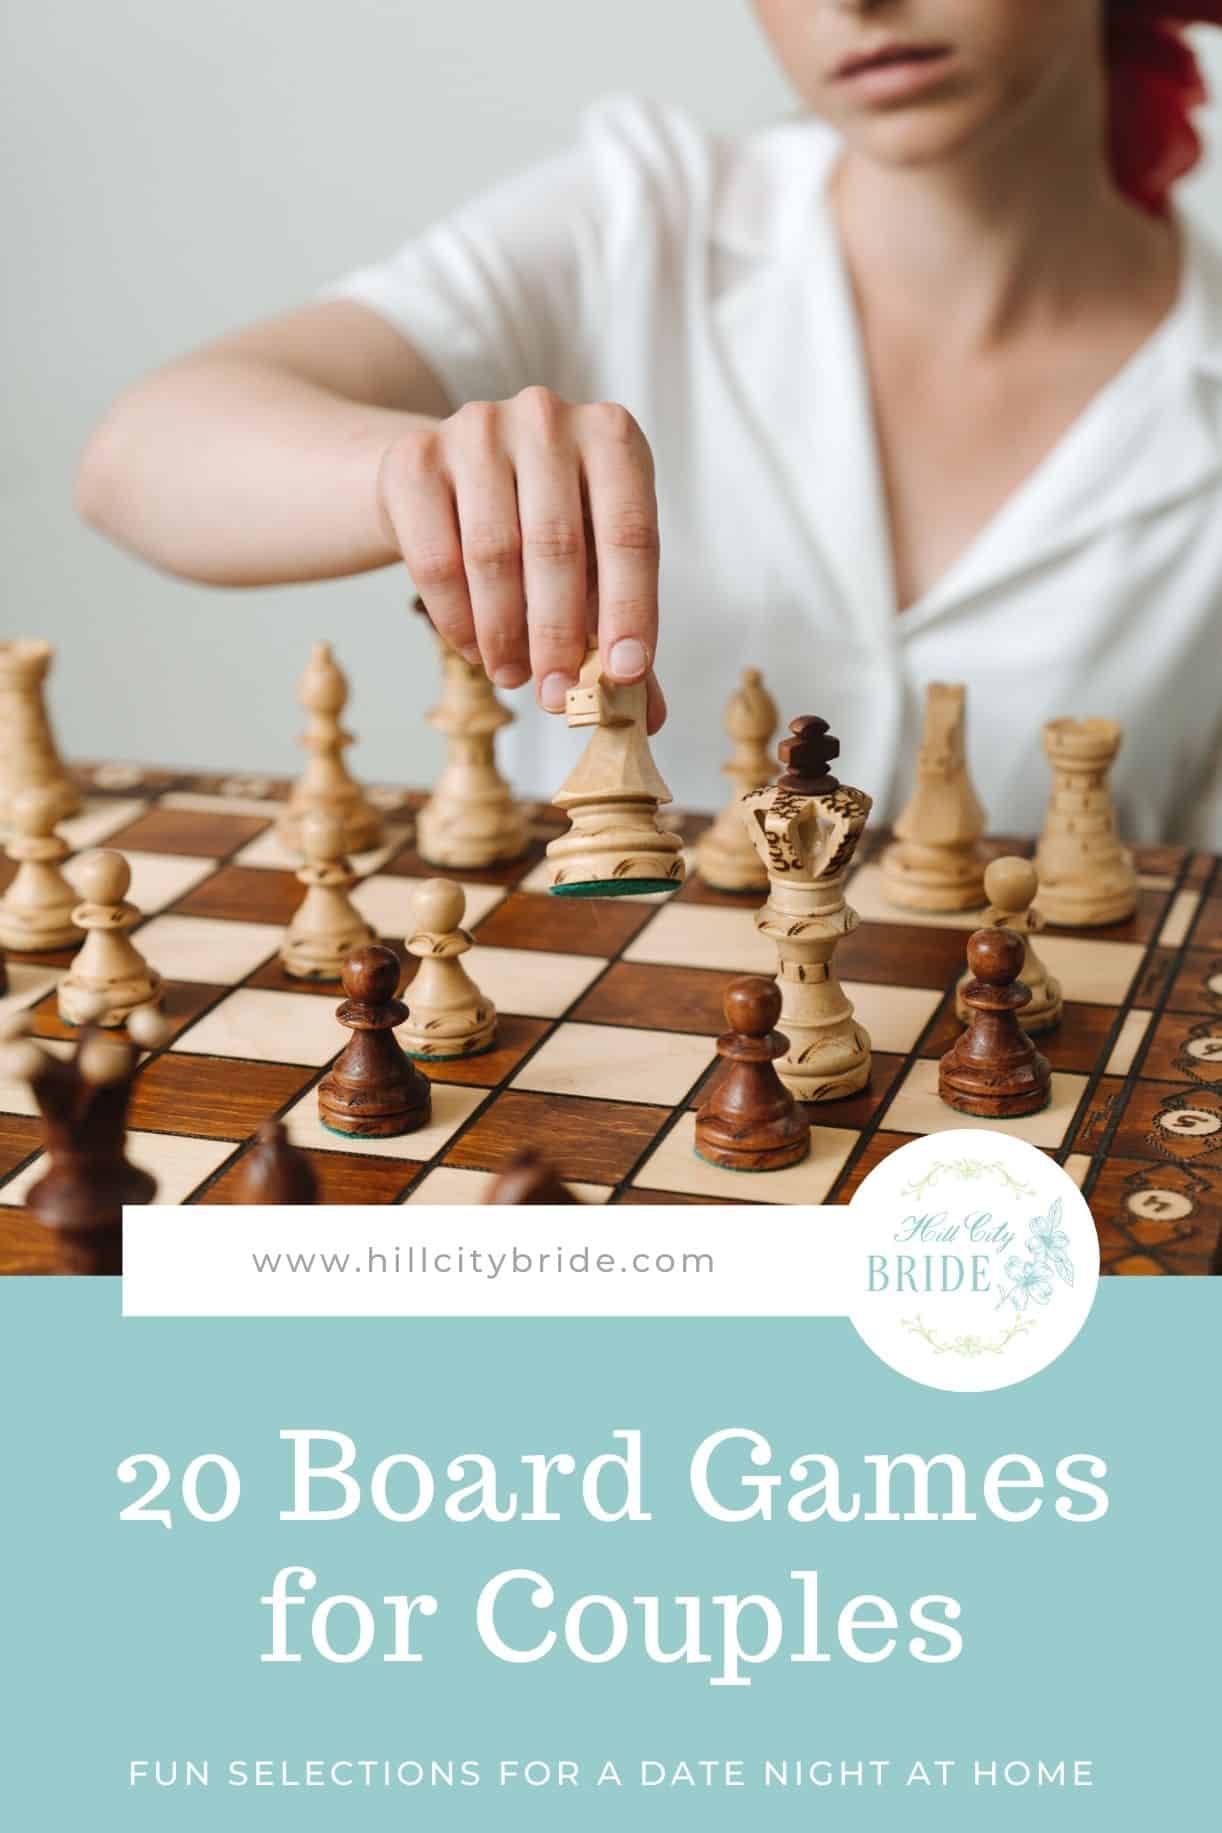 Best Board Games for Couples to Enjoy at Home